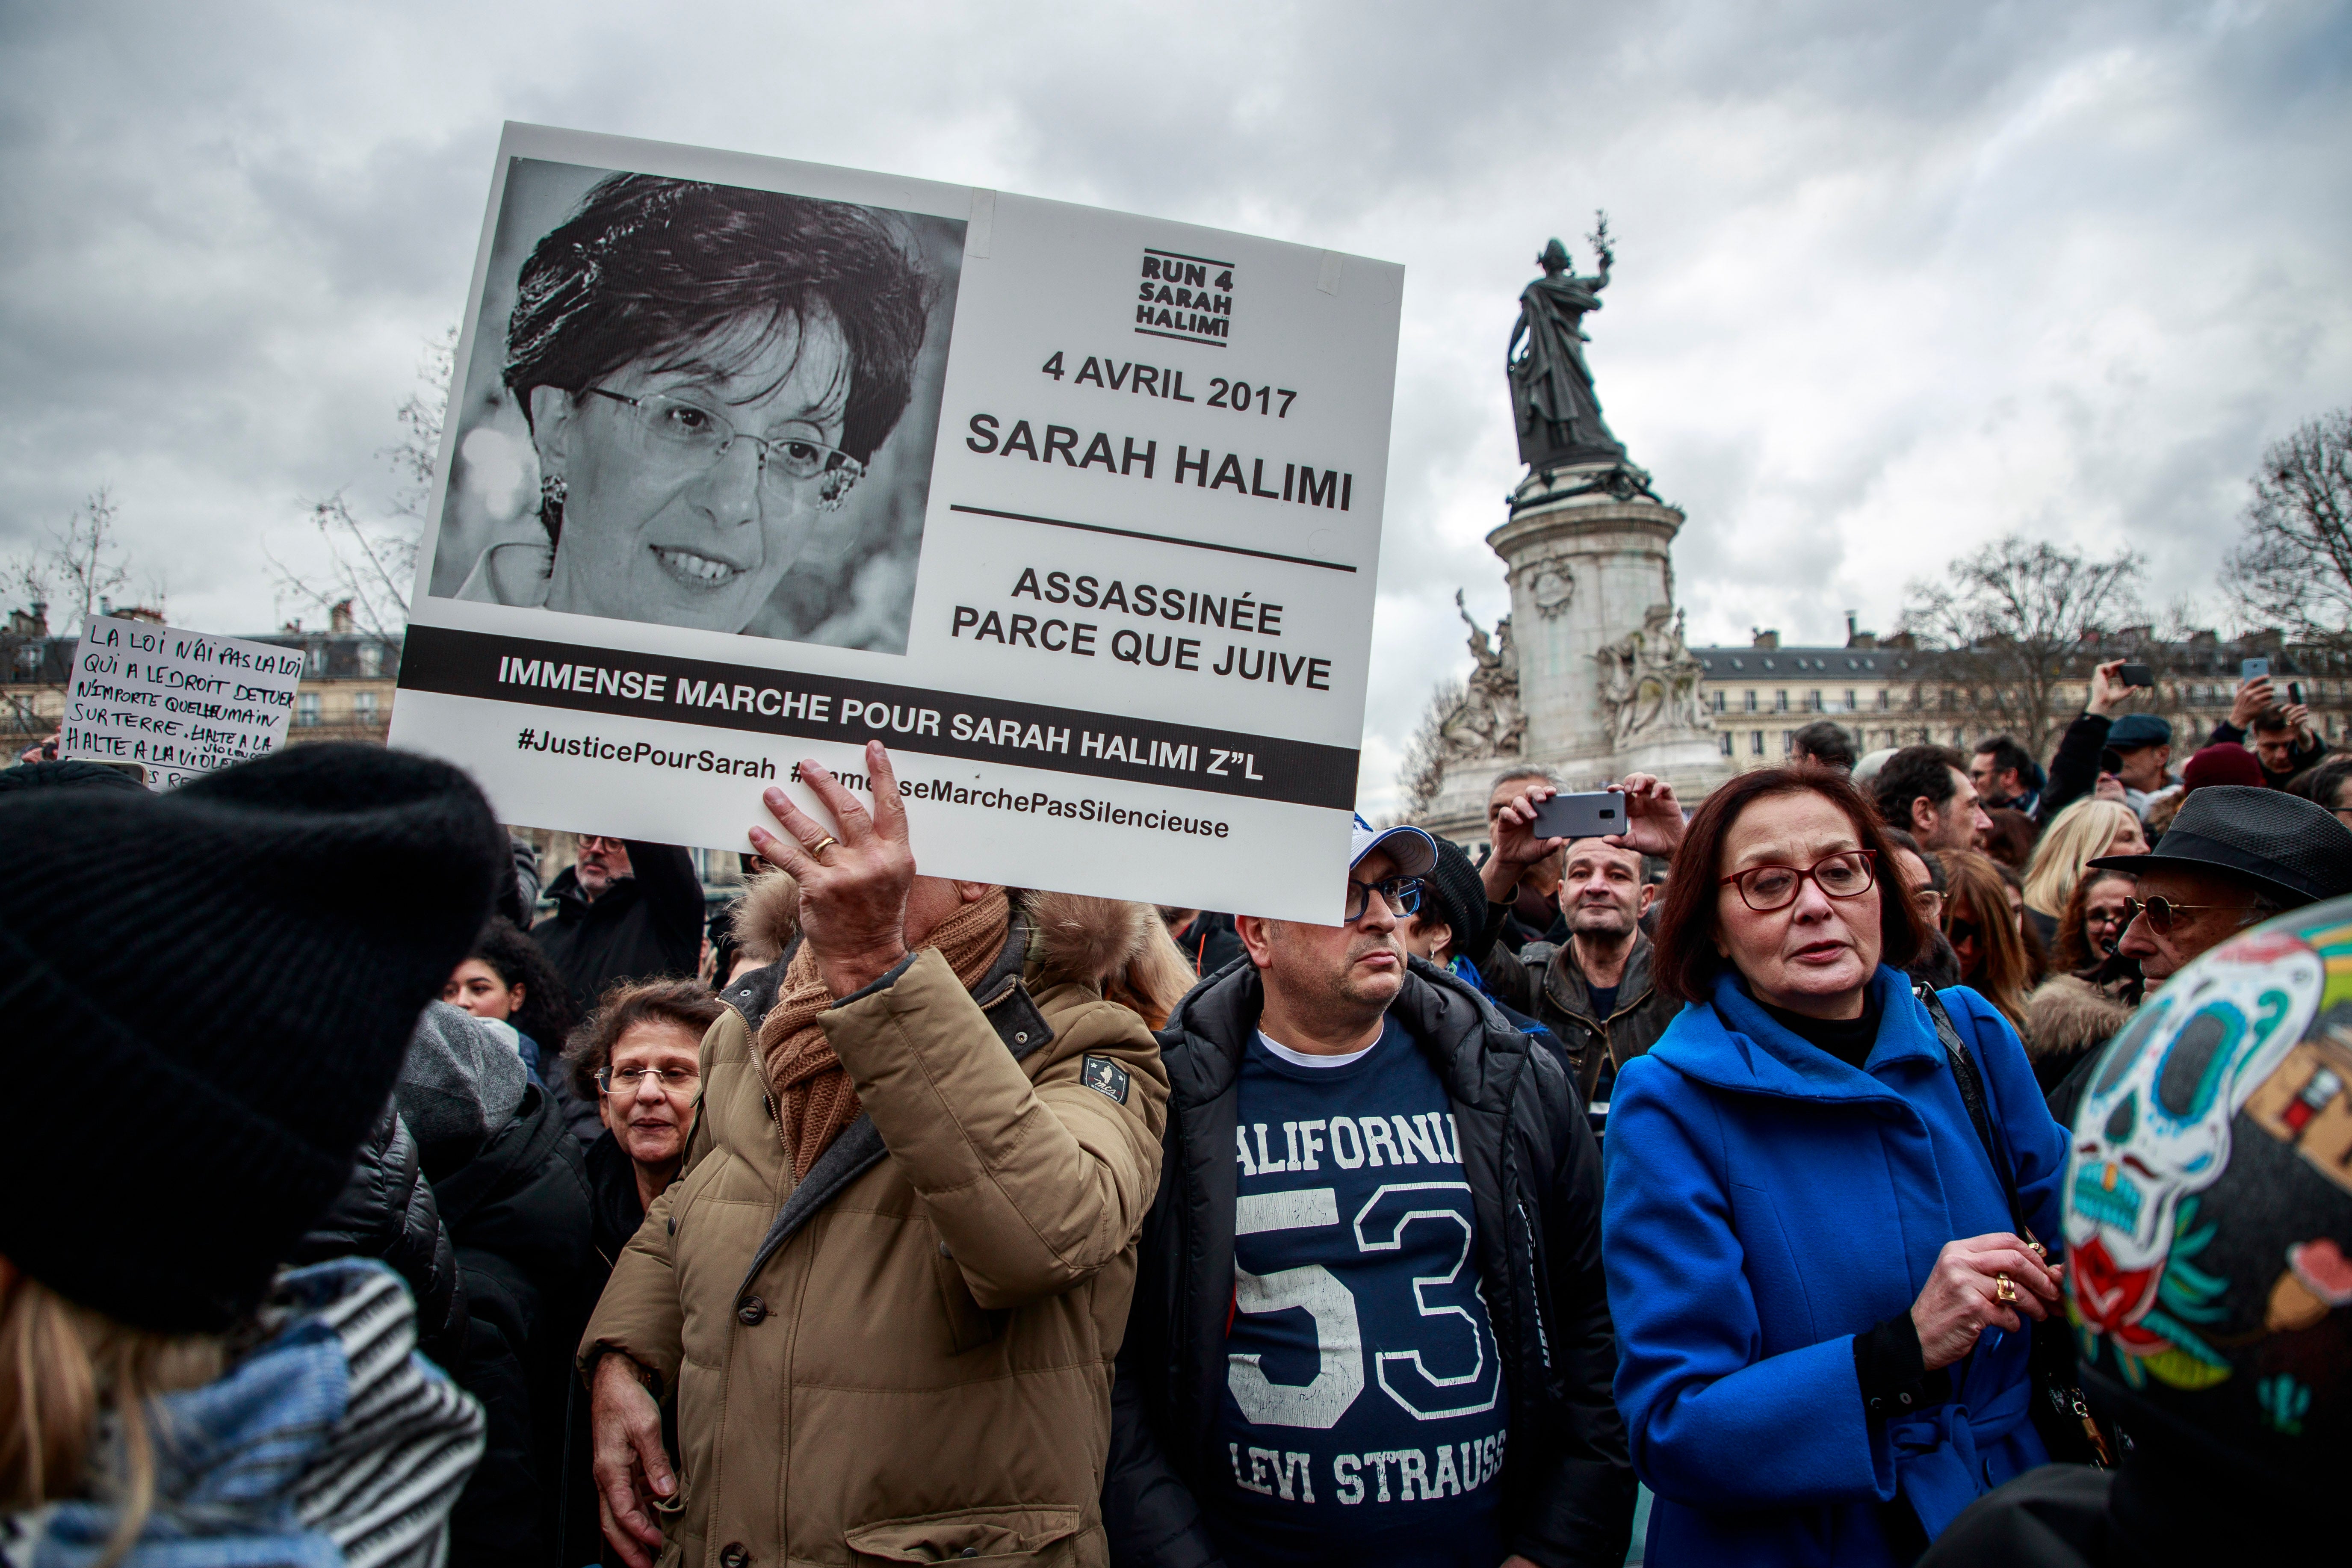 Members of the French Jewish community gather at Place de la Republique last year demanding a trial for the murderer of Sarah Halimi. The 65-year-old Jewish woman was killed by a man that French Justice declared irresponsible for his acts and therefore cannot be tried for the antisemitic crime